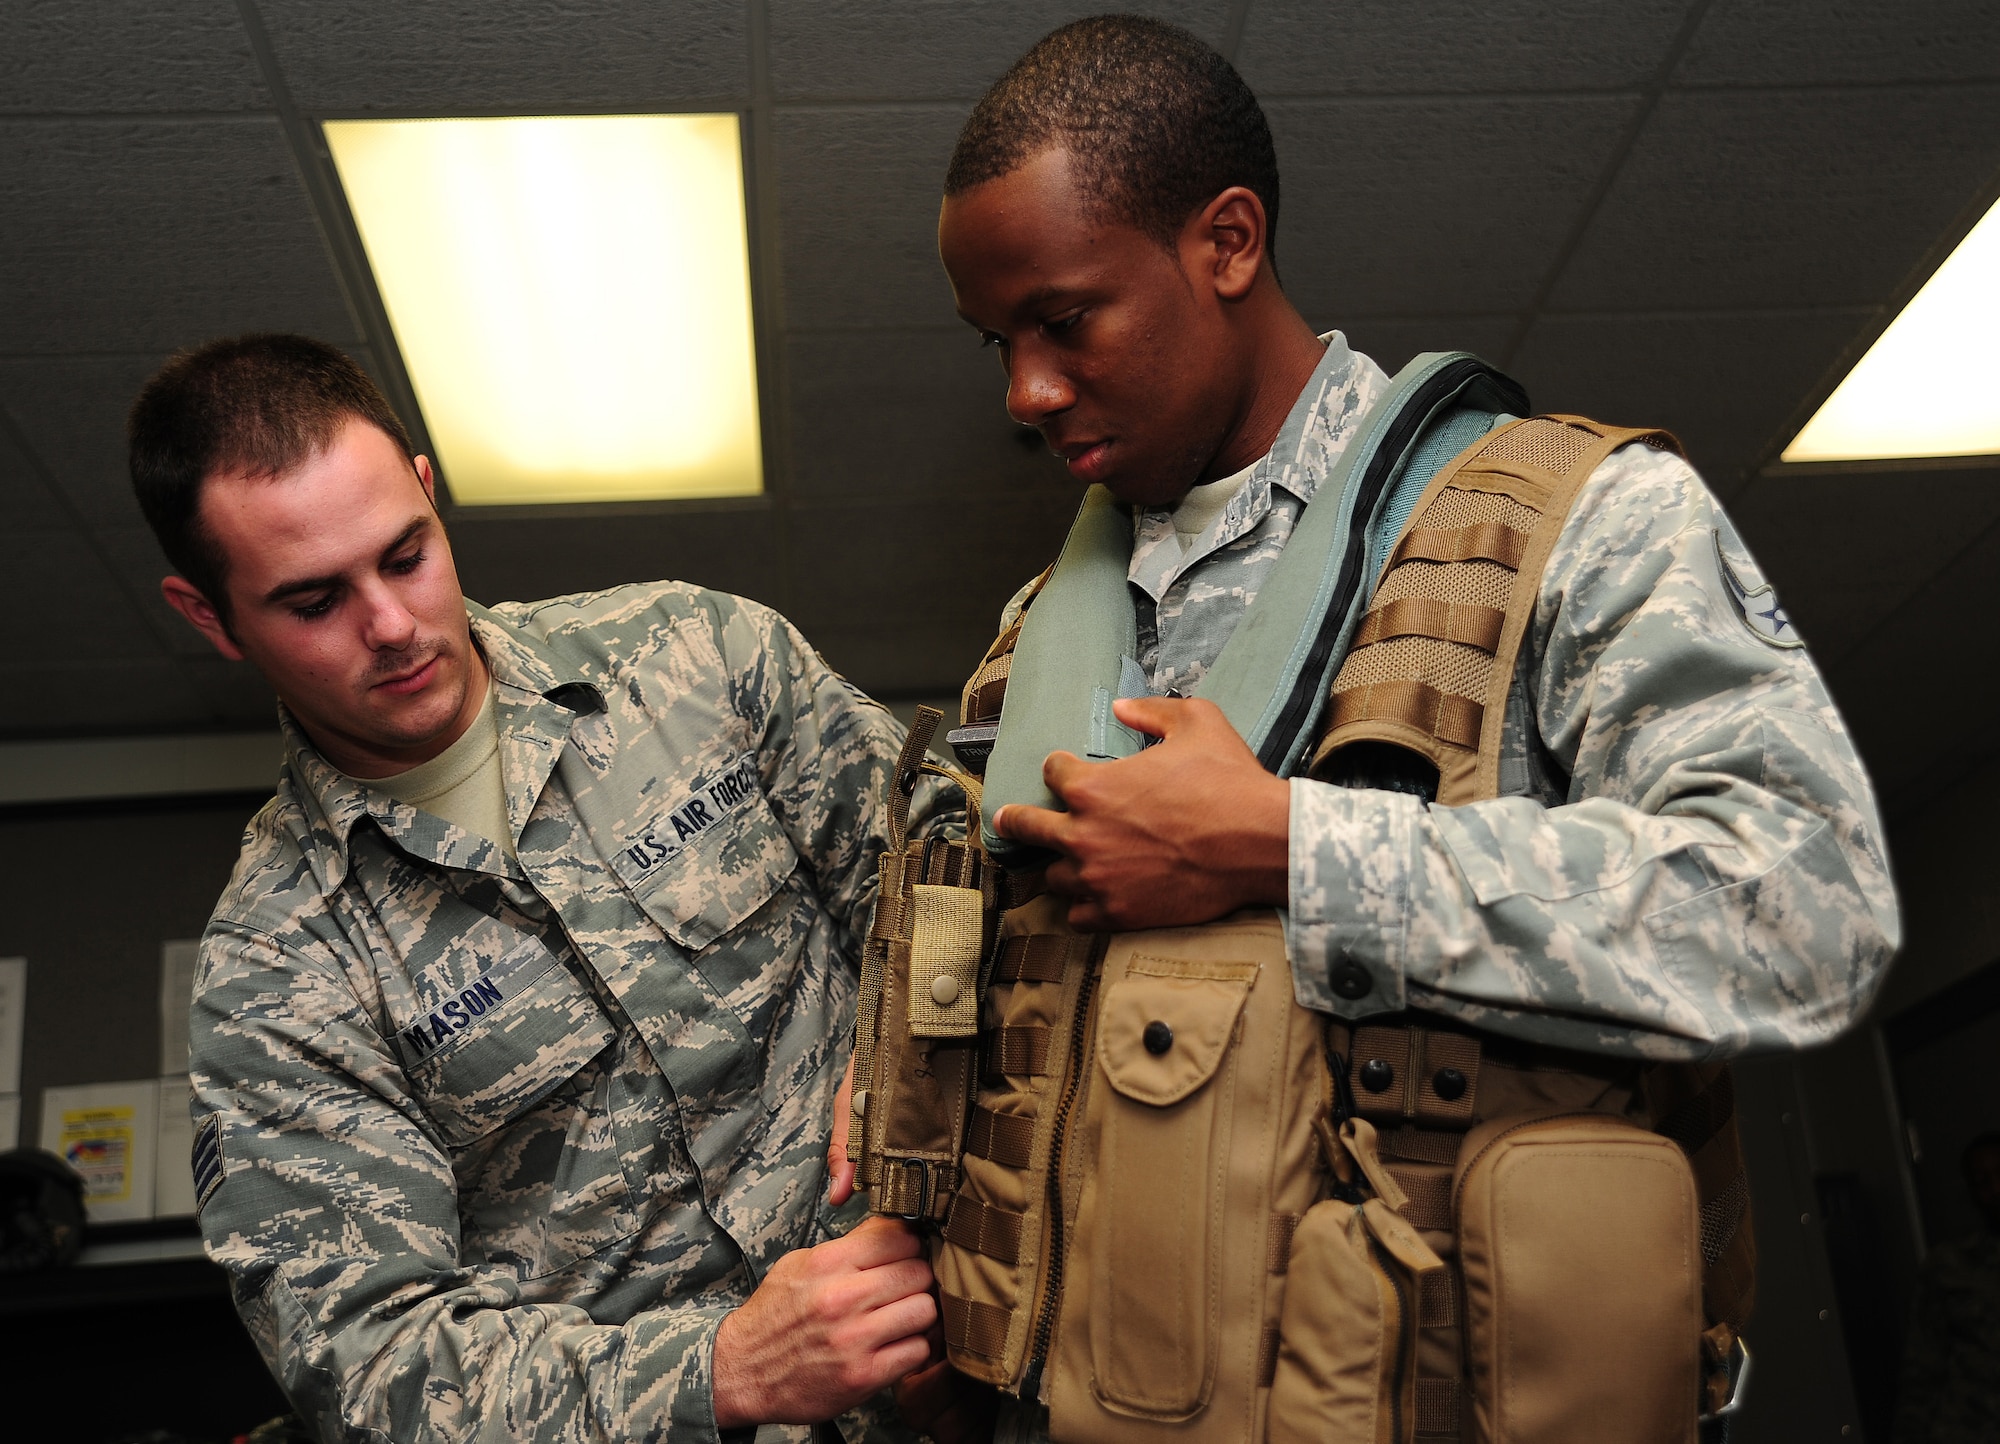 Airsave vest provides peace of mind to aircrew > Whiteman Air Force Base >  Display